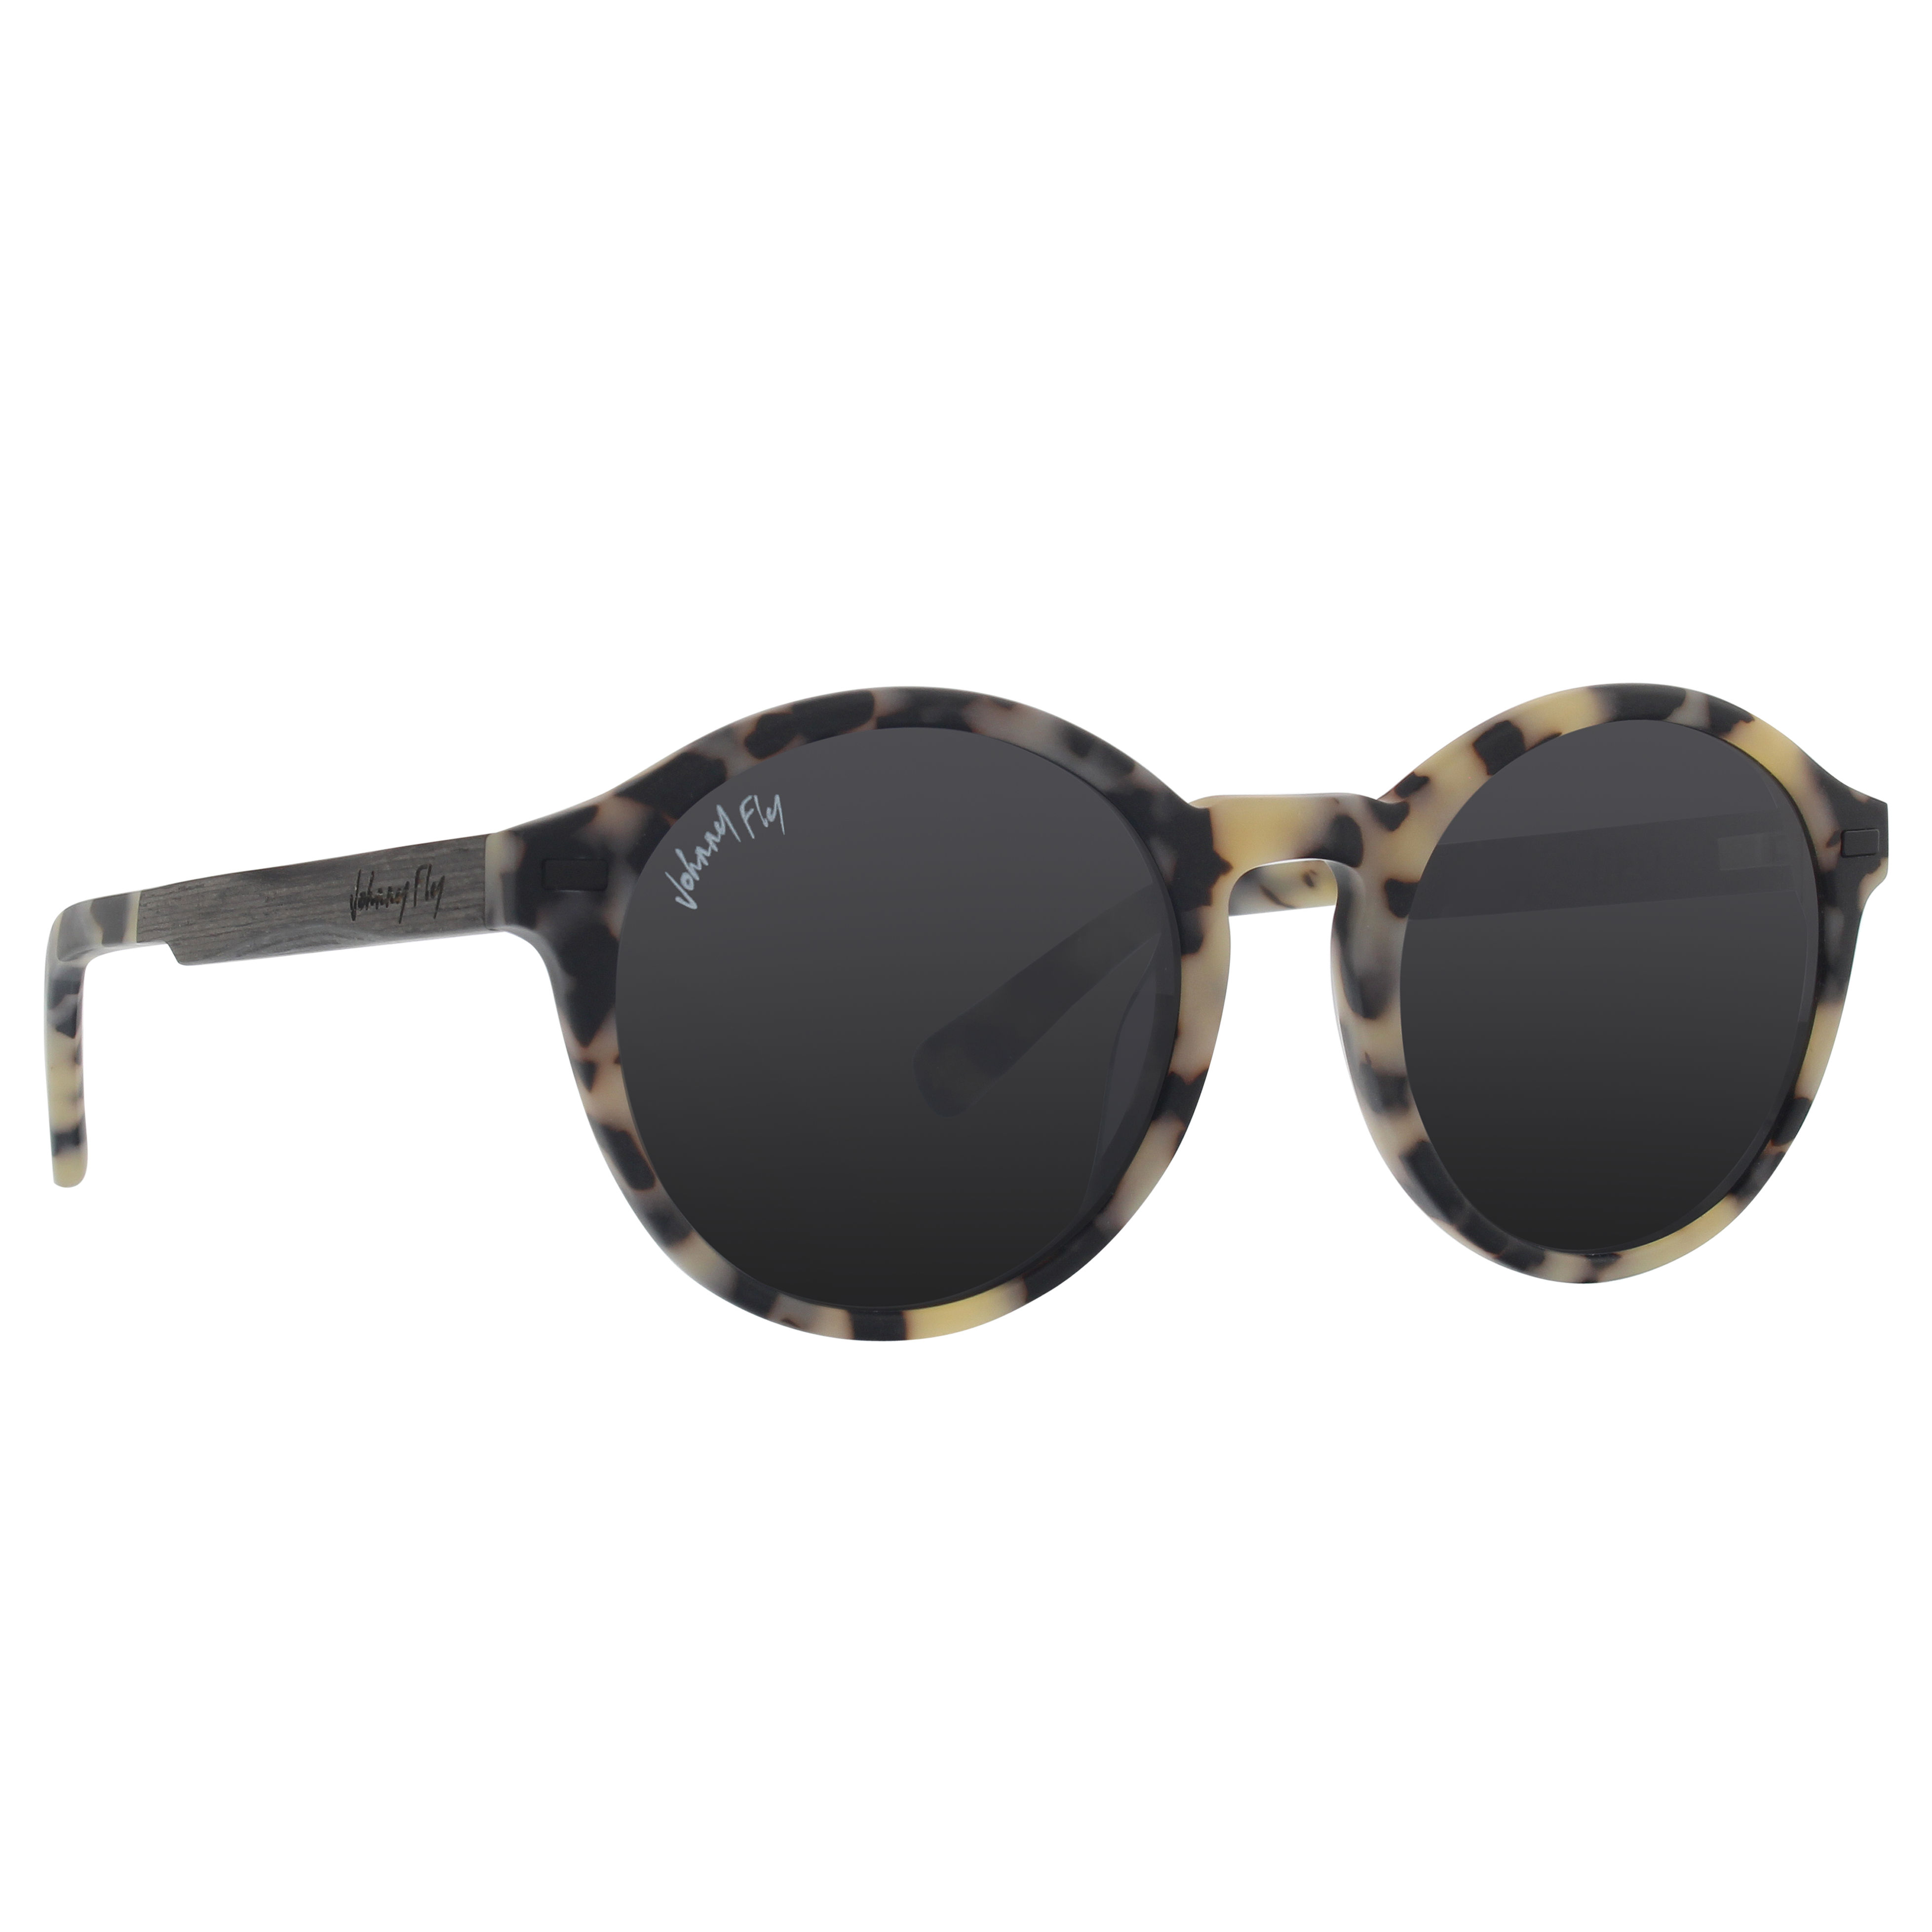 UFO Polarized Sunglasses in Matte White Tortoise by Johnny Fly | 